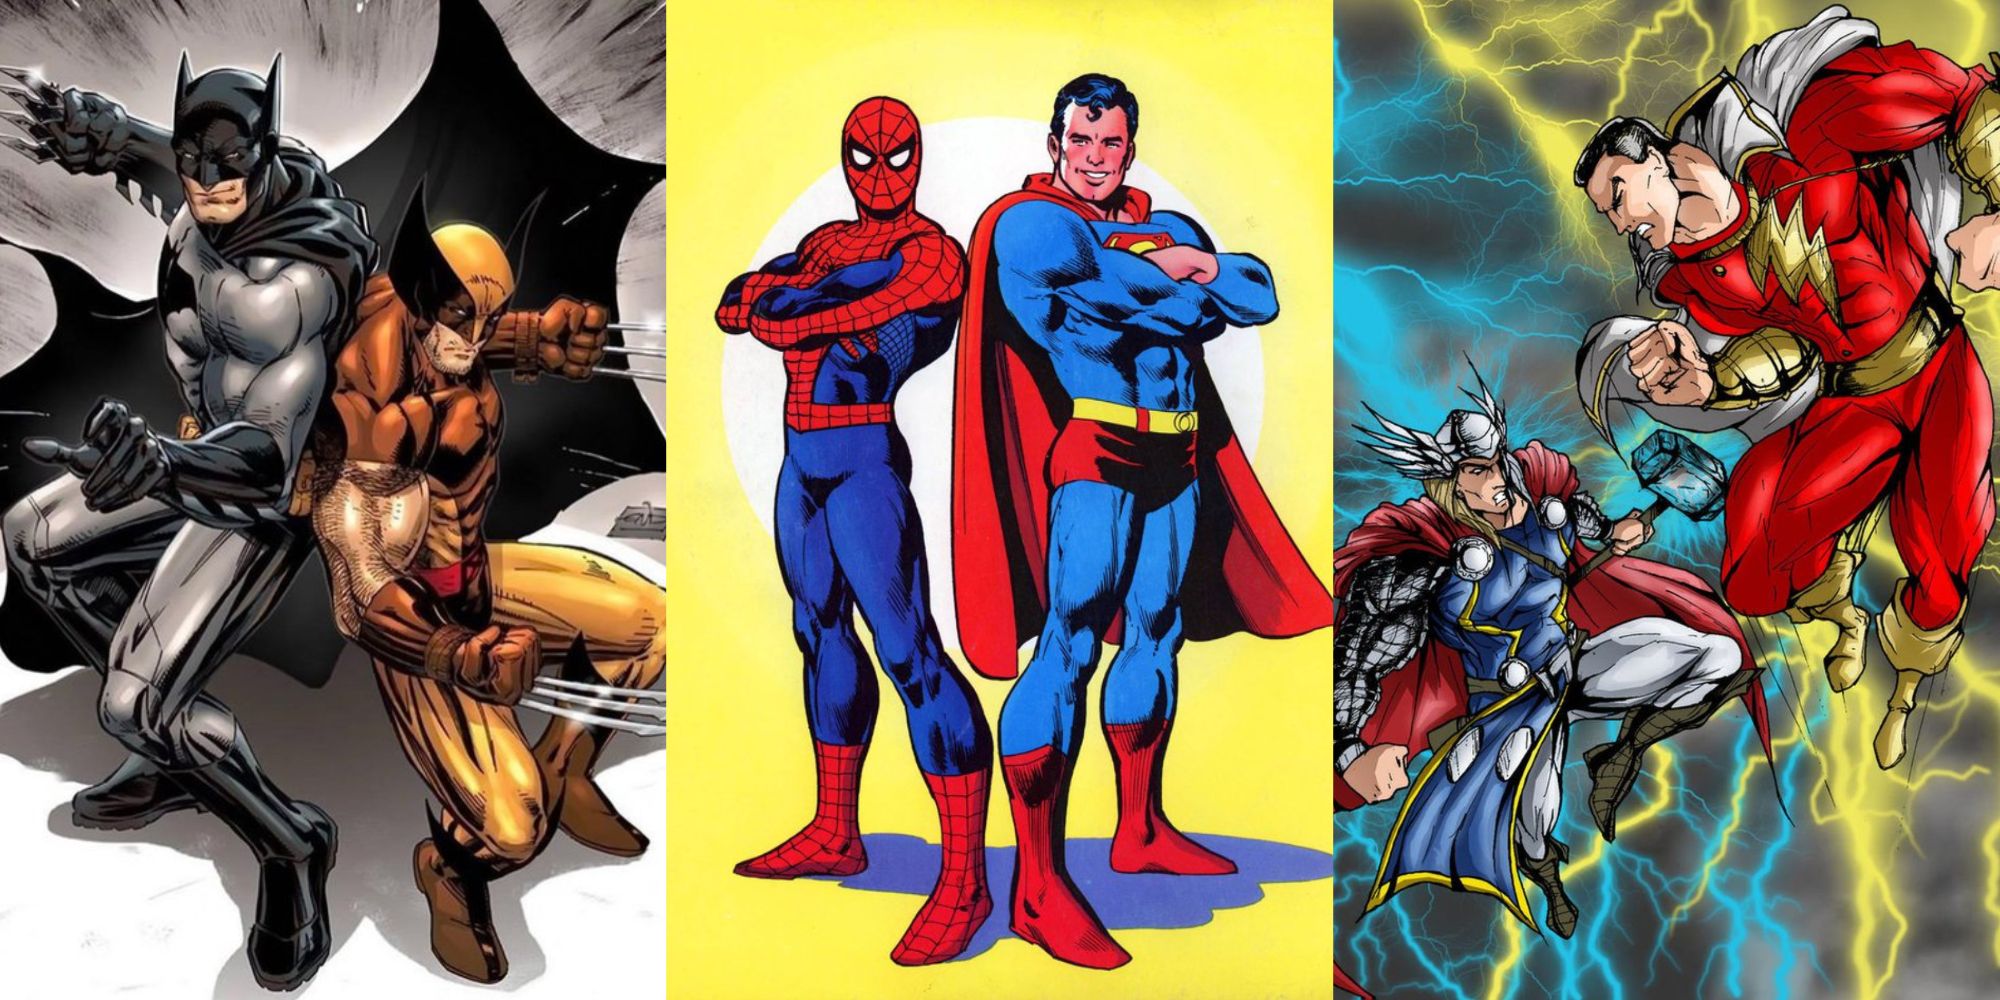 MCU: 8 Most Realistic DCEU Crossover Ideas Based On The Comics